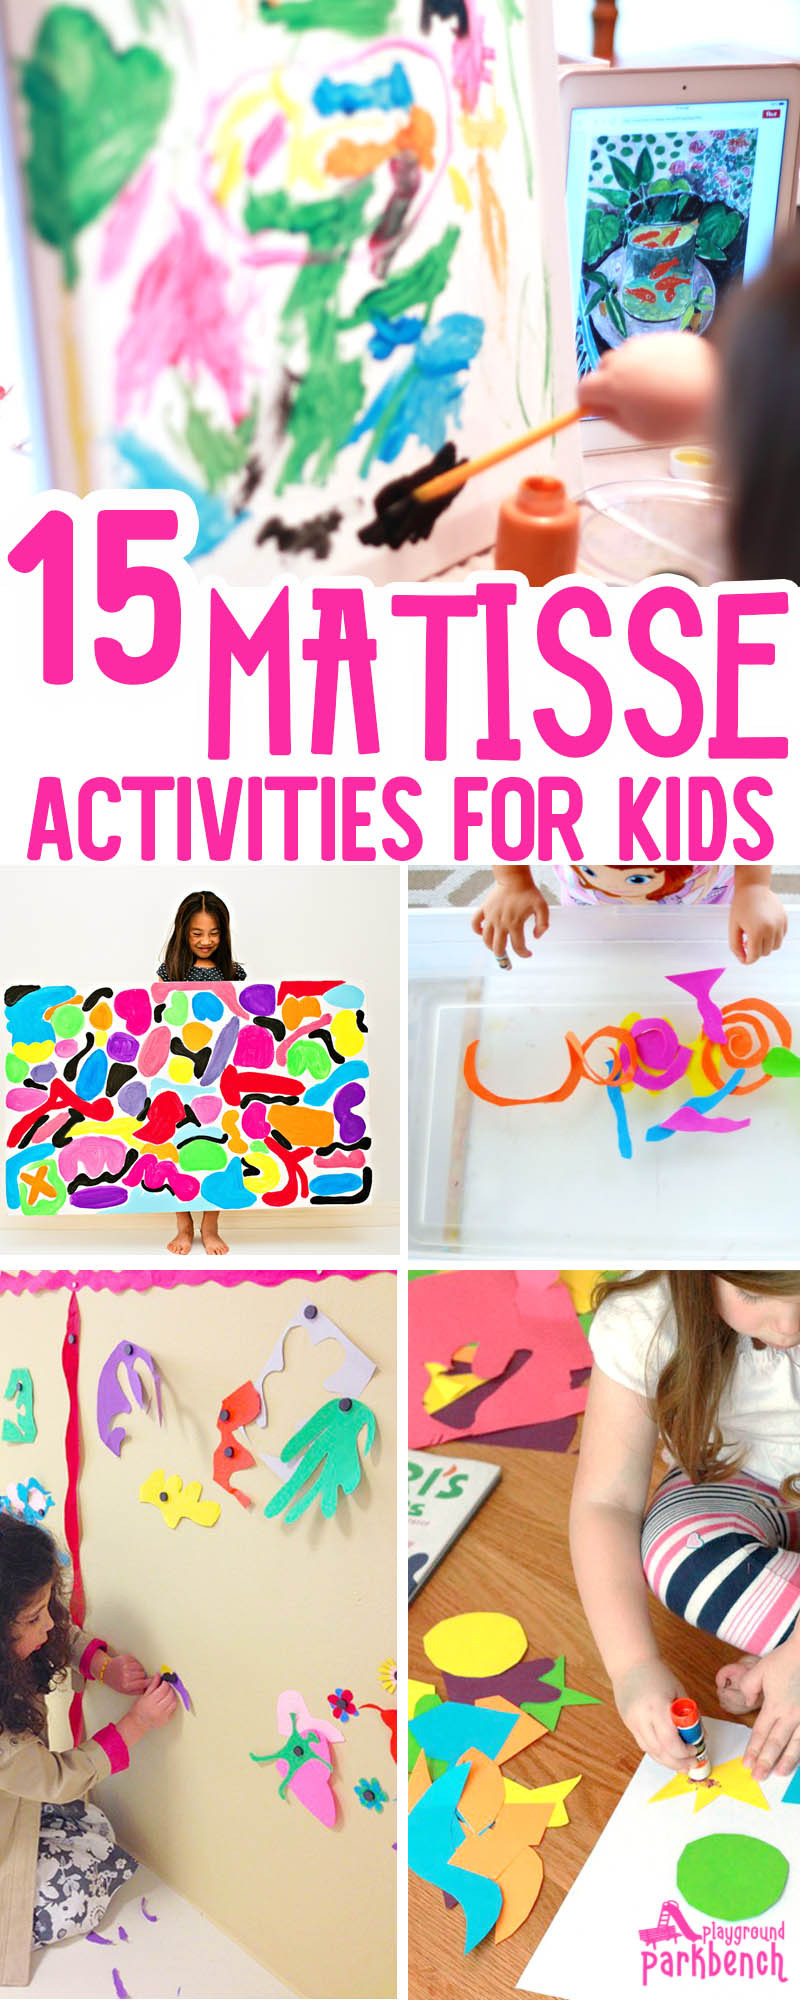 Fun Art Activities For Kids
 15 Vibrant Matisse Art Projects for Kids That Really Wow